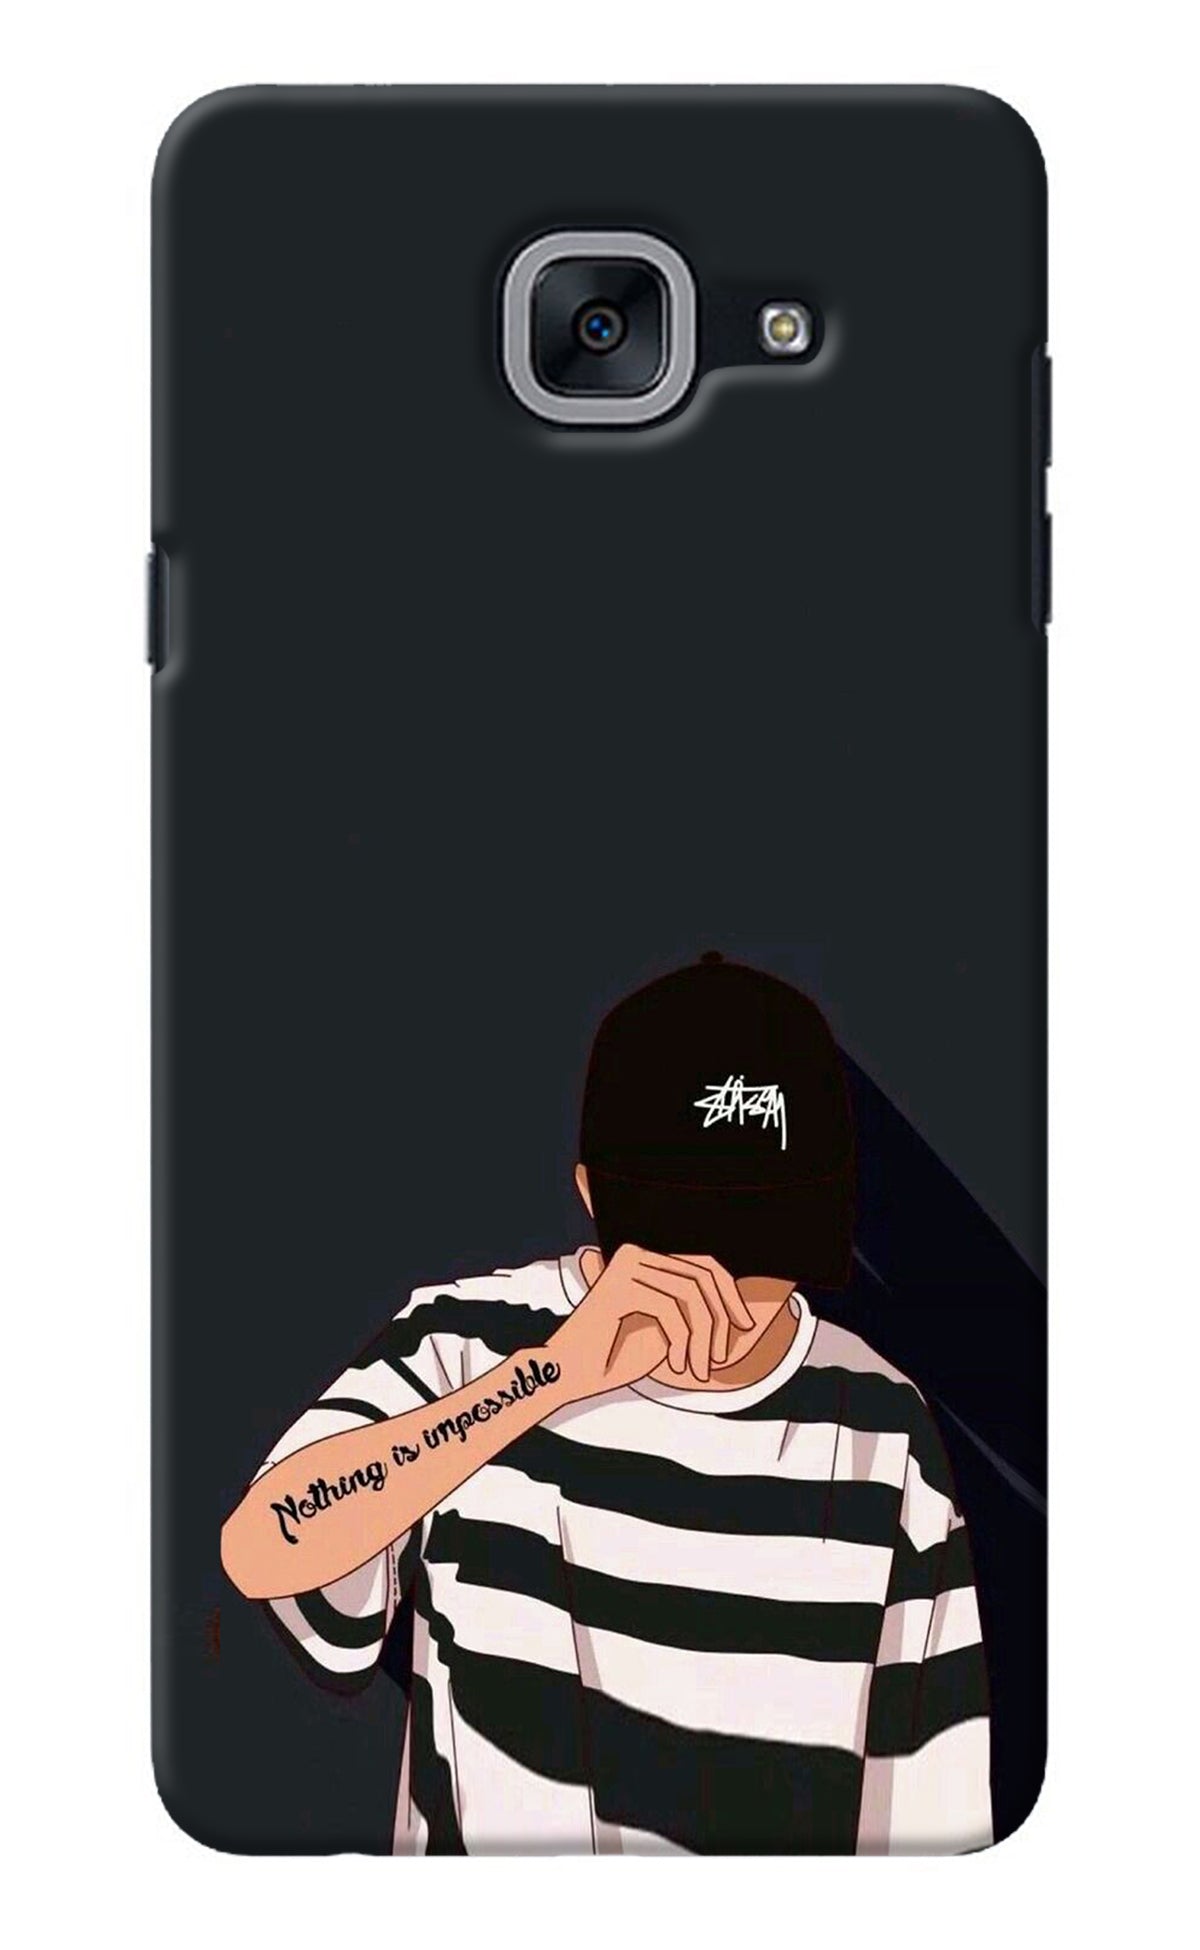 Aesthetic Boy Samsung J7 Max Back Cover